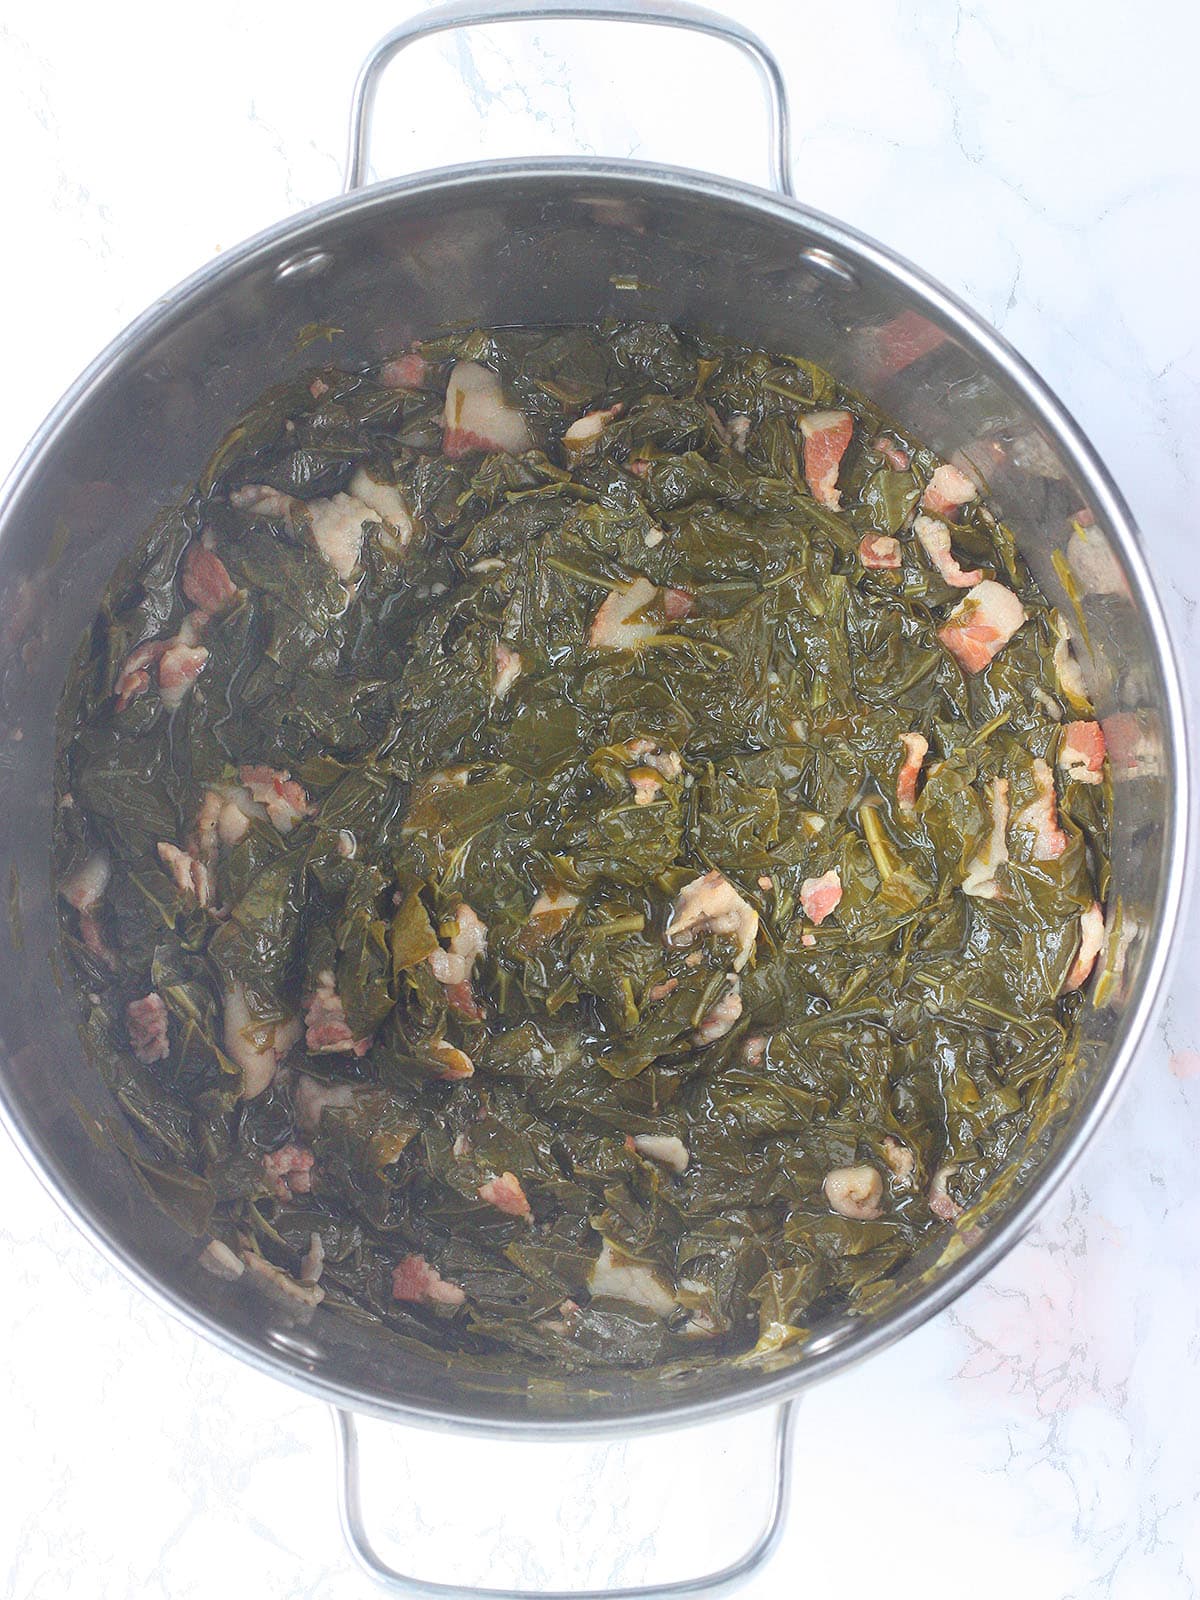 cooked turnip greens in a stainless steel pot